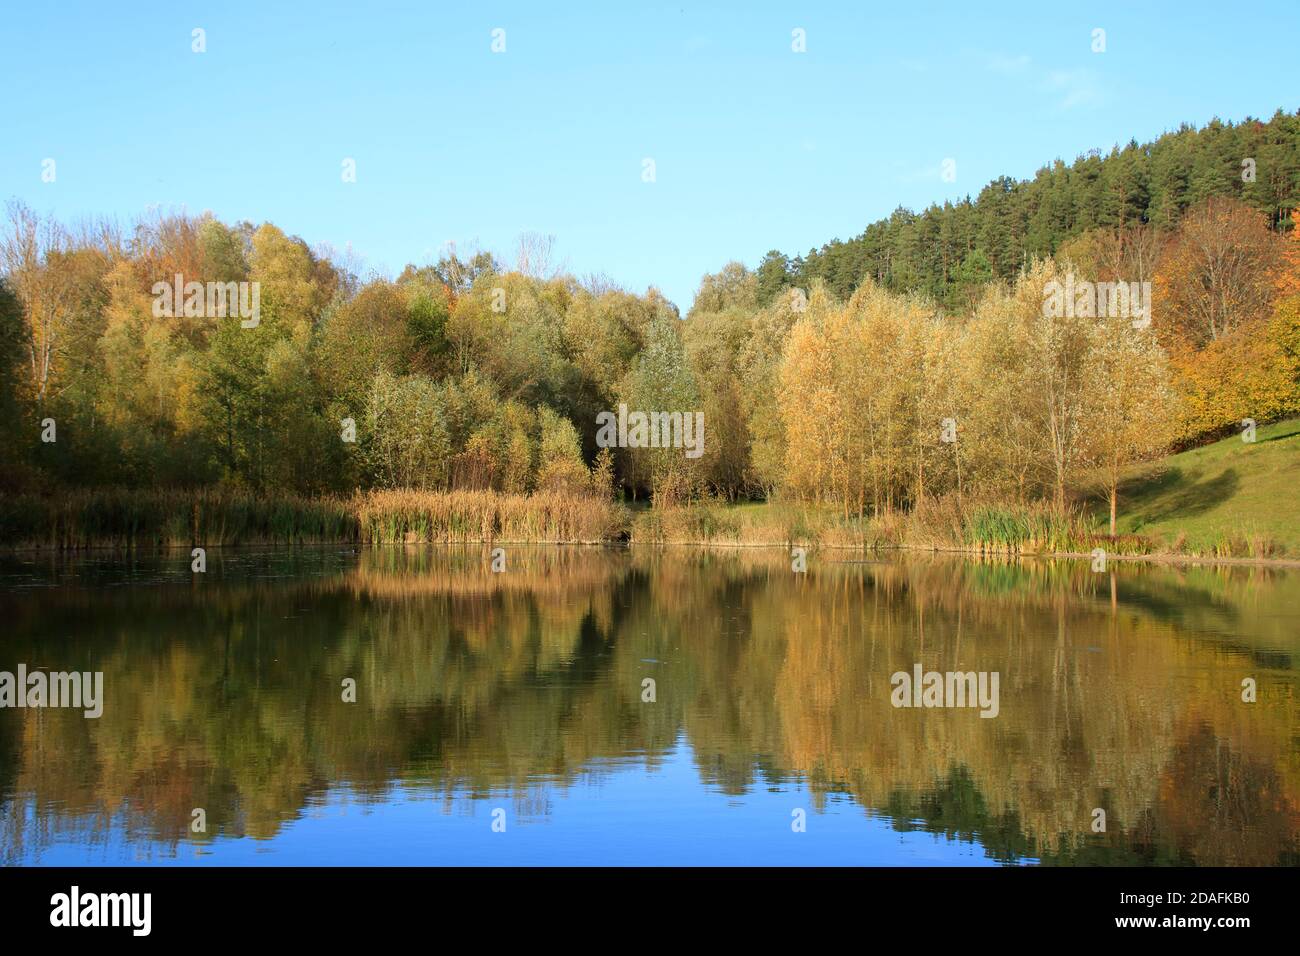 View of the lake gültlingen. The autumn forest is reflected in the lake. Stock Photo